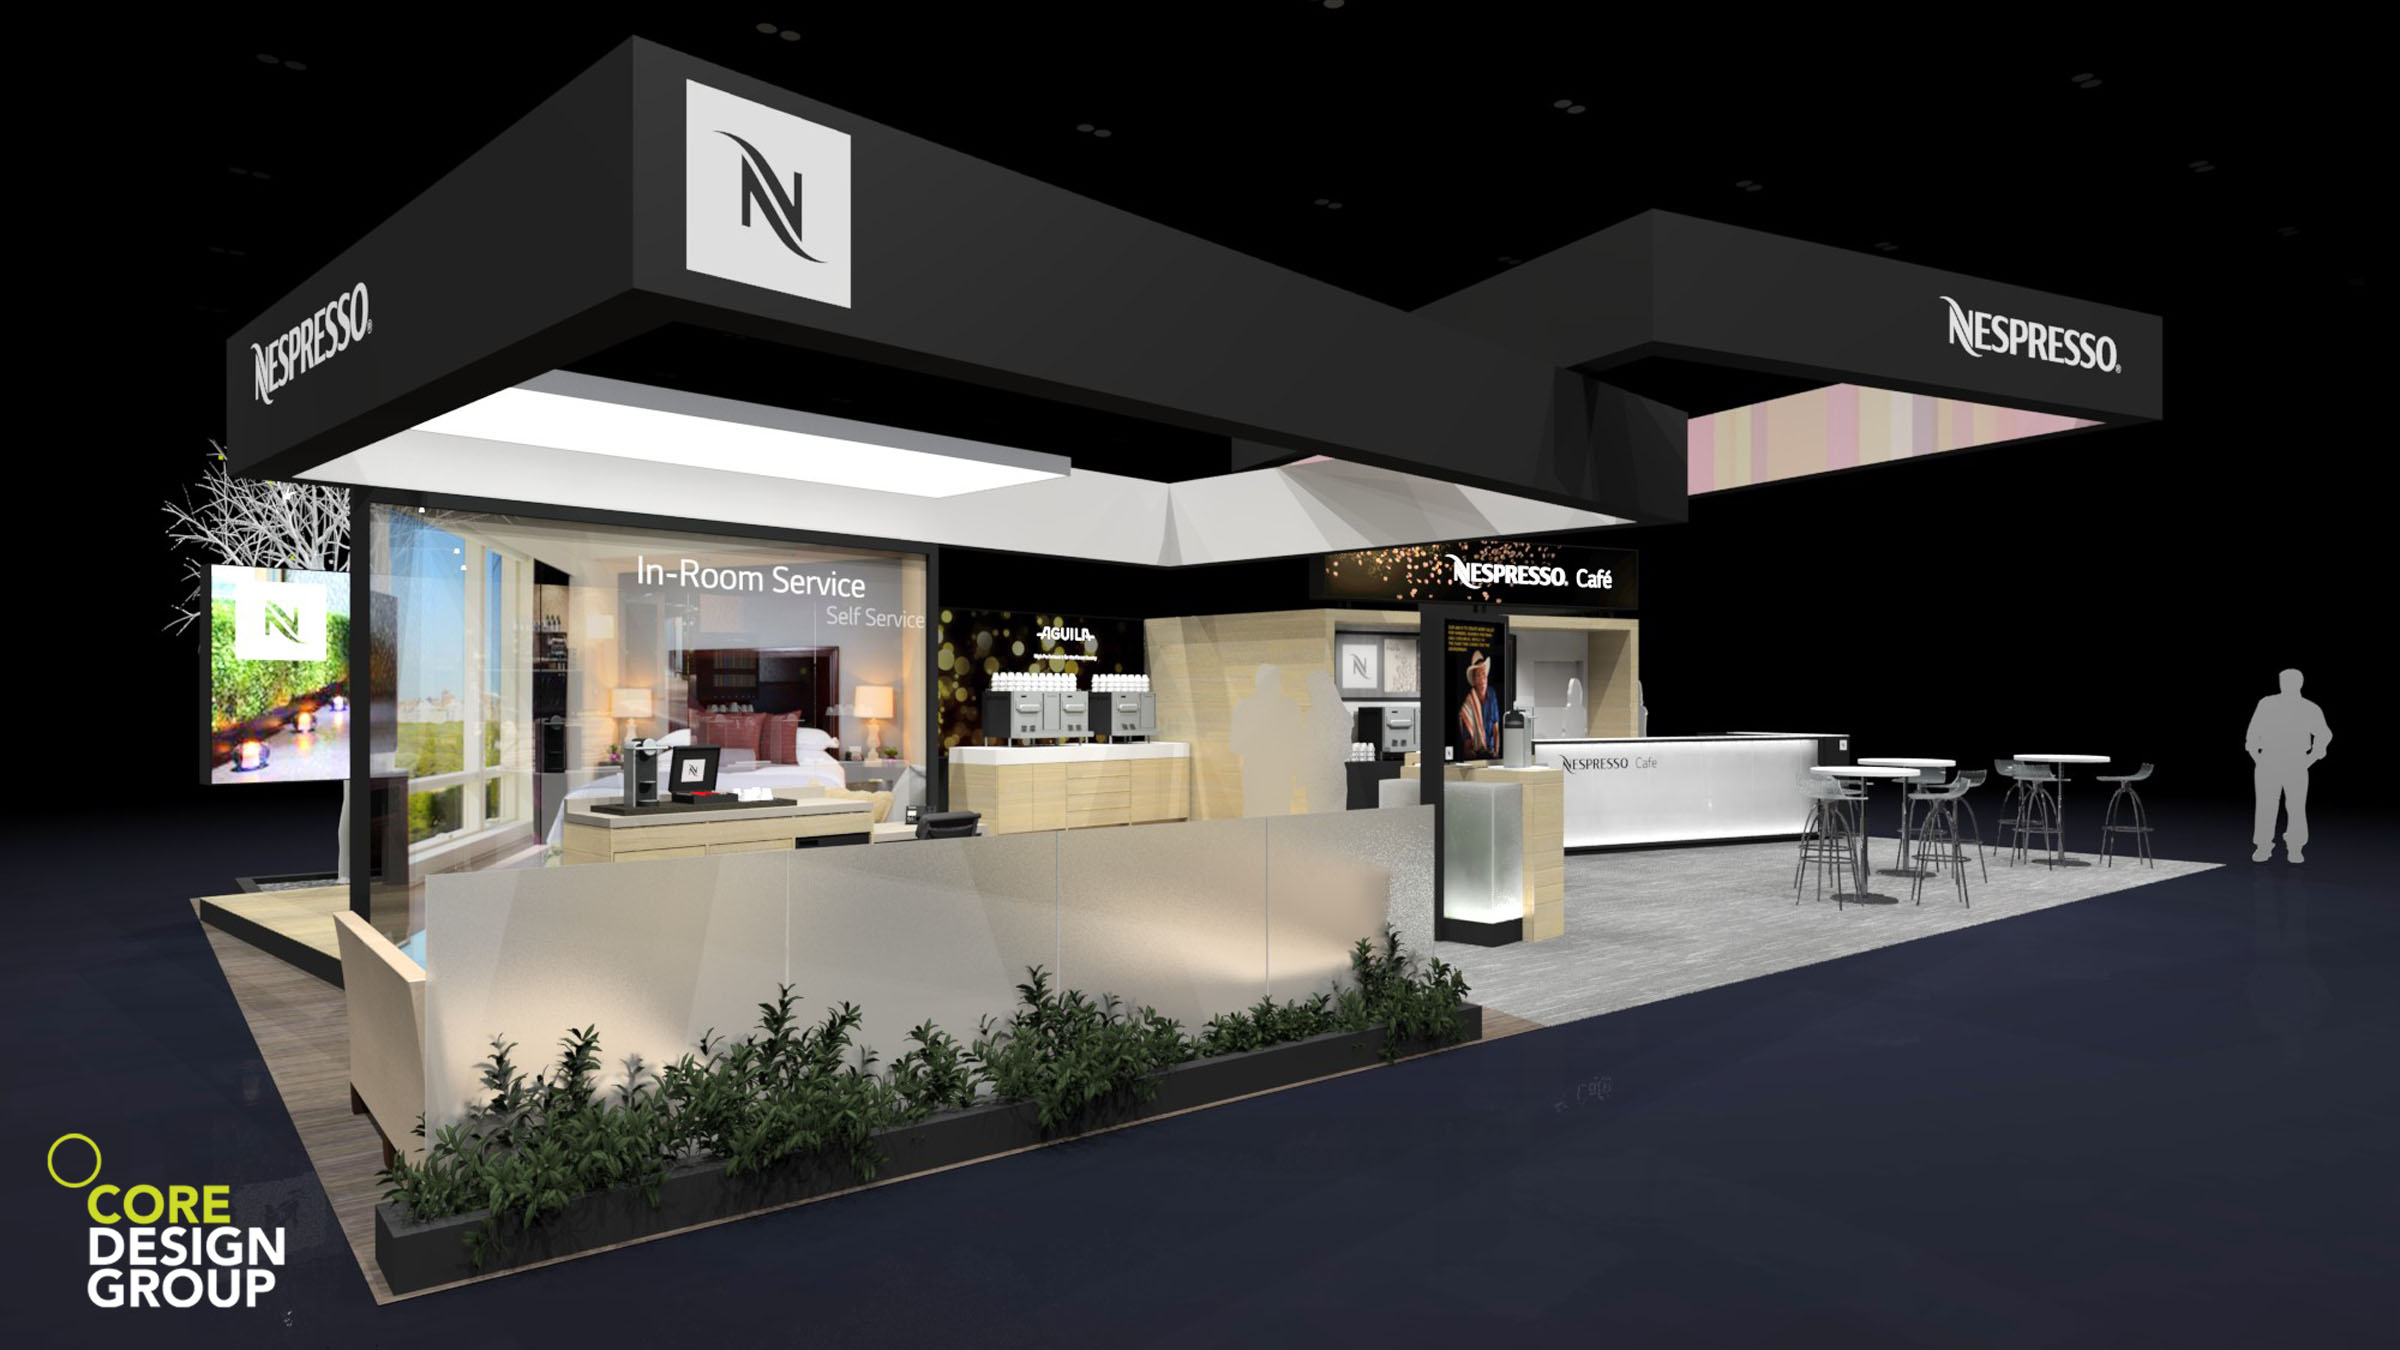 Aeroccino Nespresso to rent for events, fairs, exhibitions and stands.